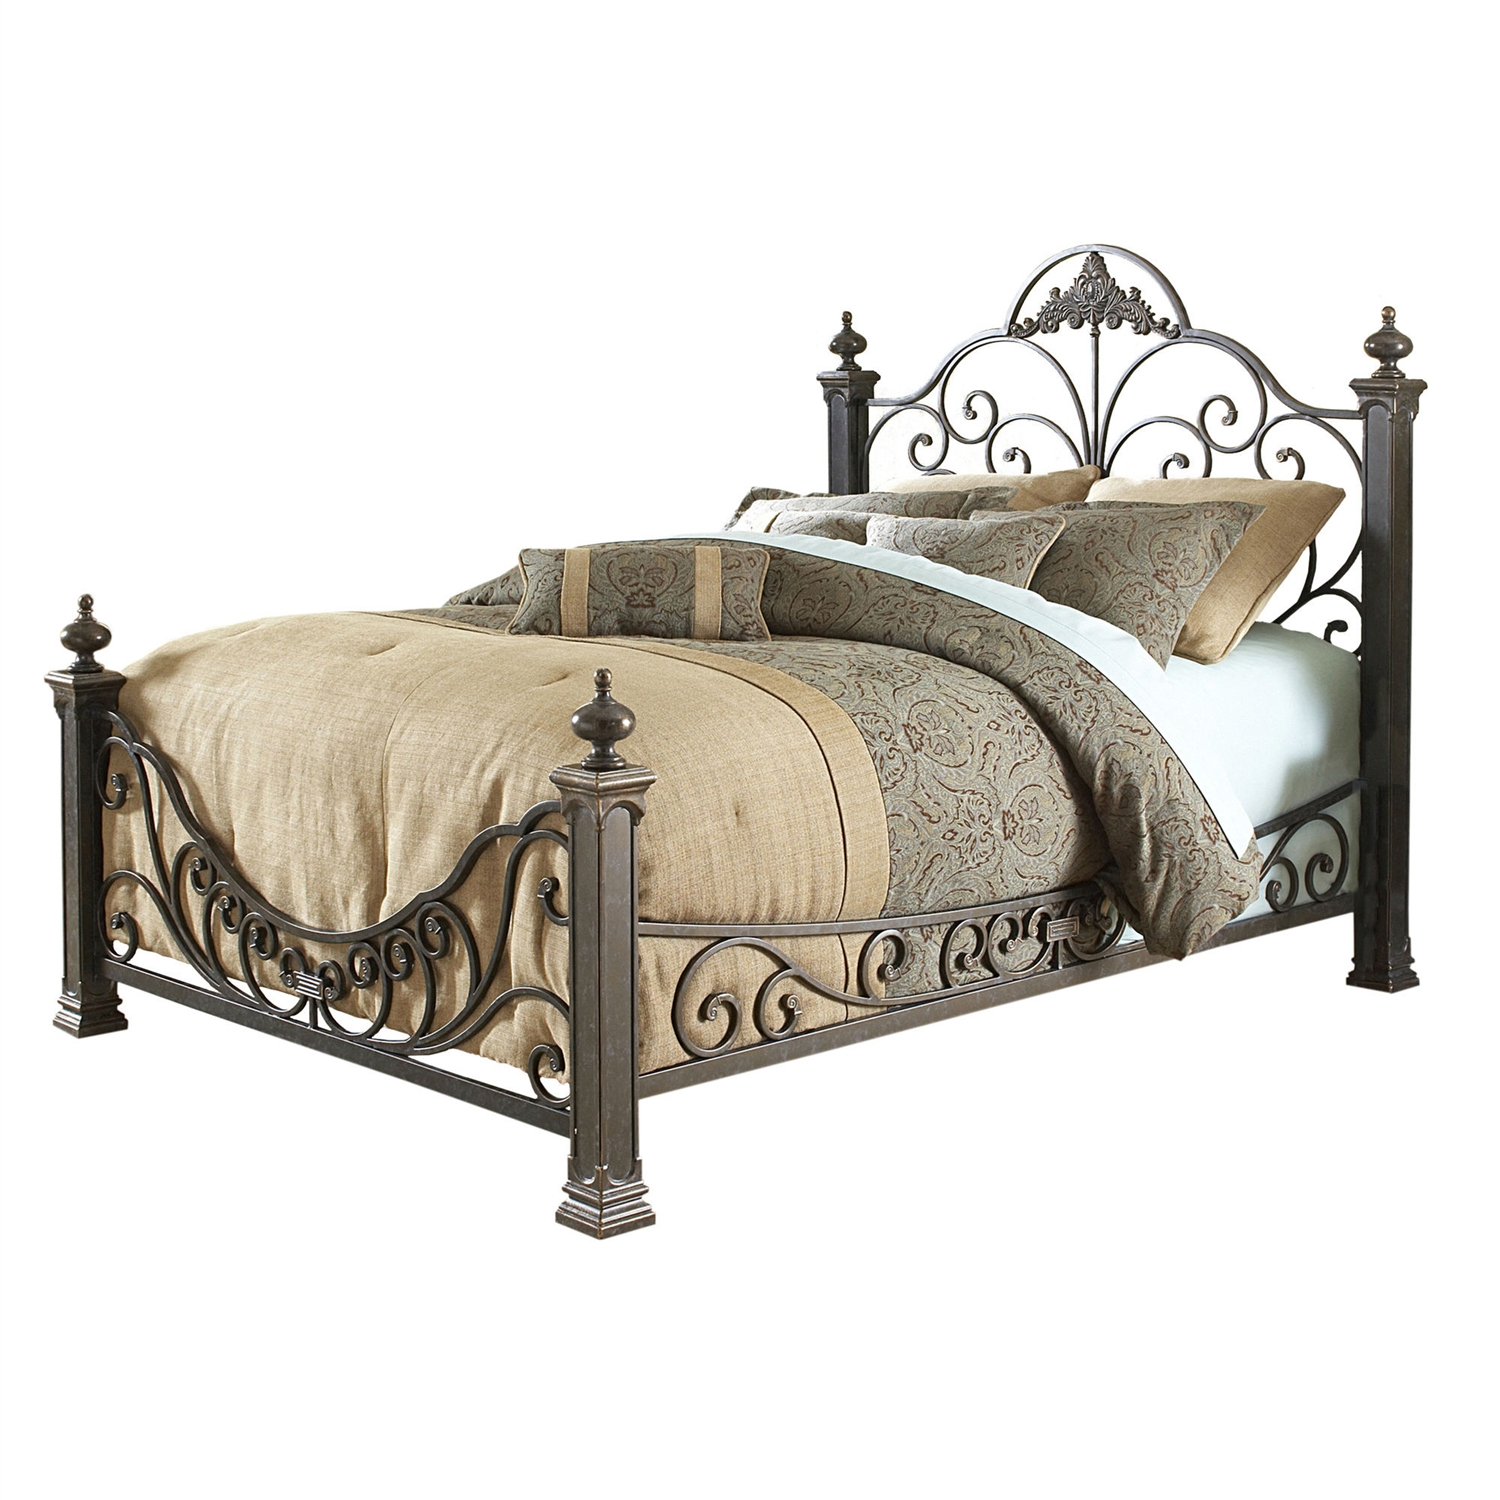 Queen size Baroque Style Metal Bed with Headboard and Footboard